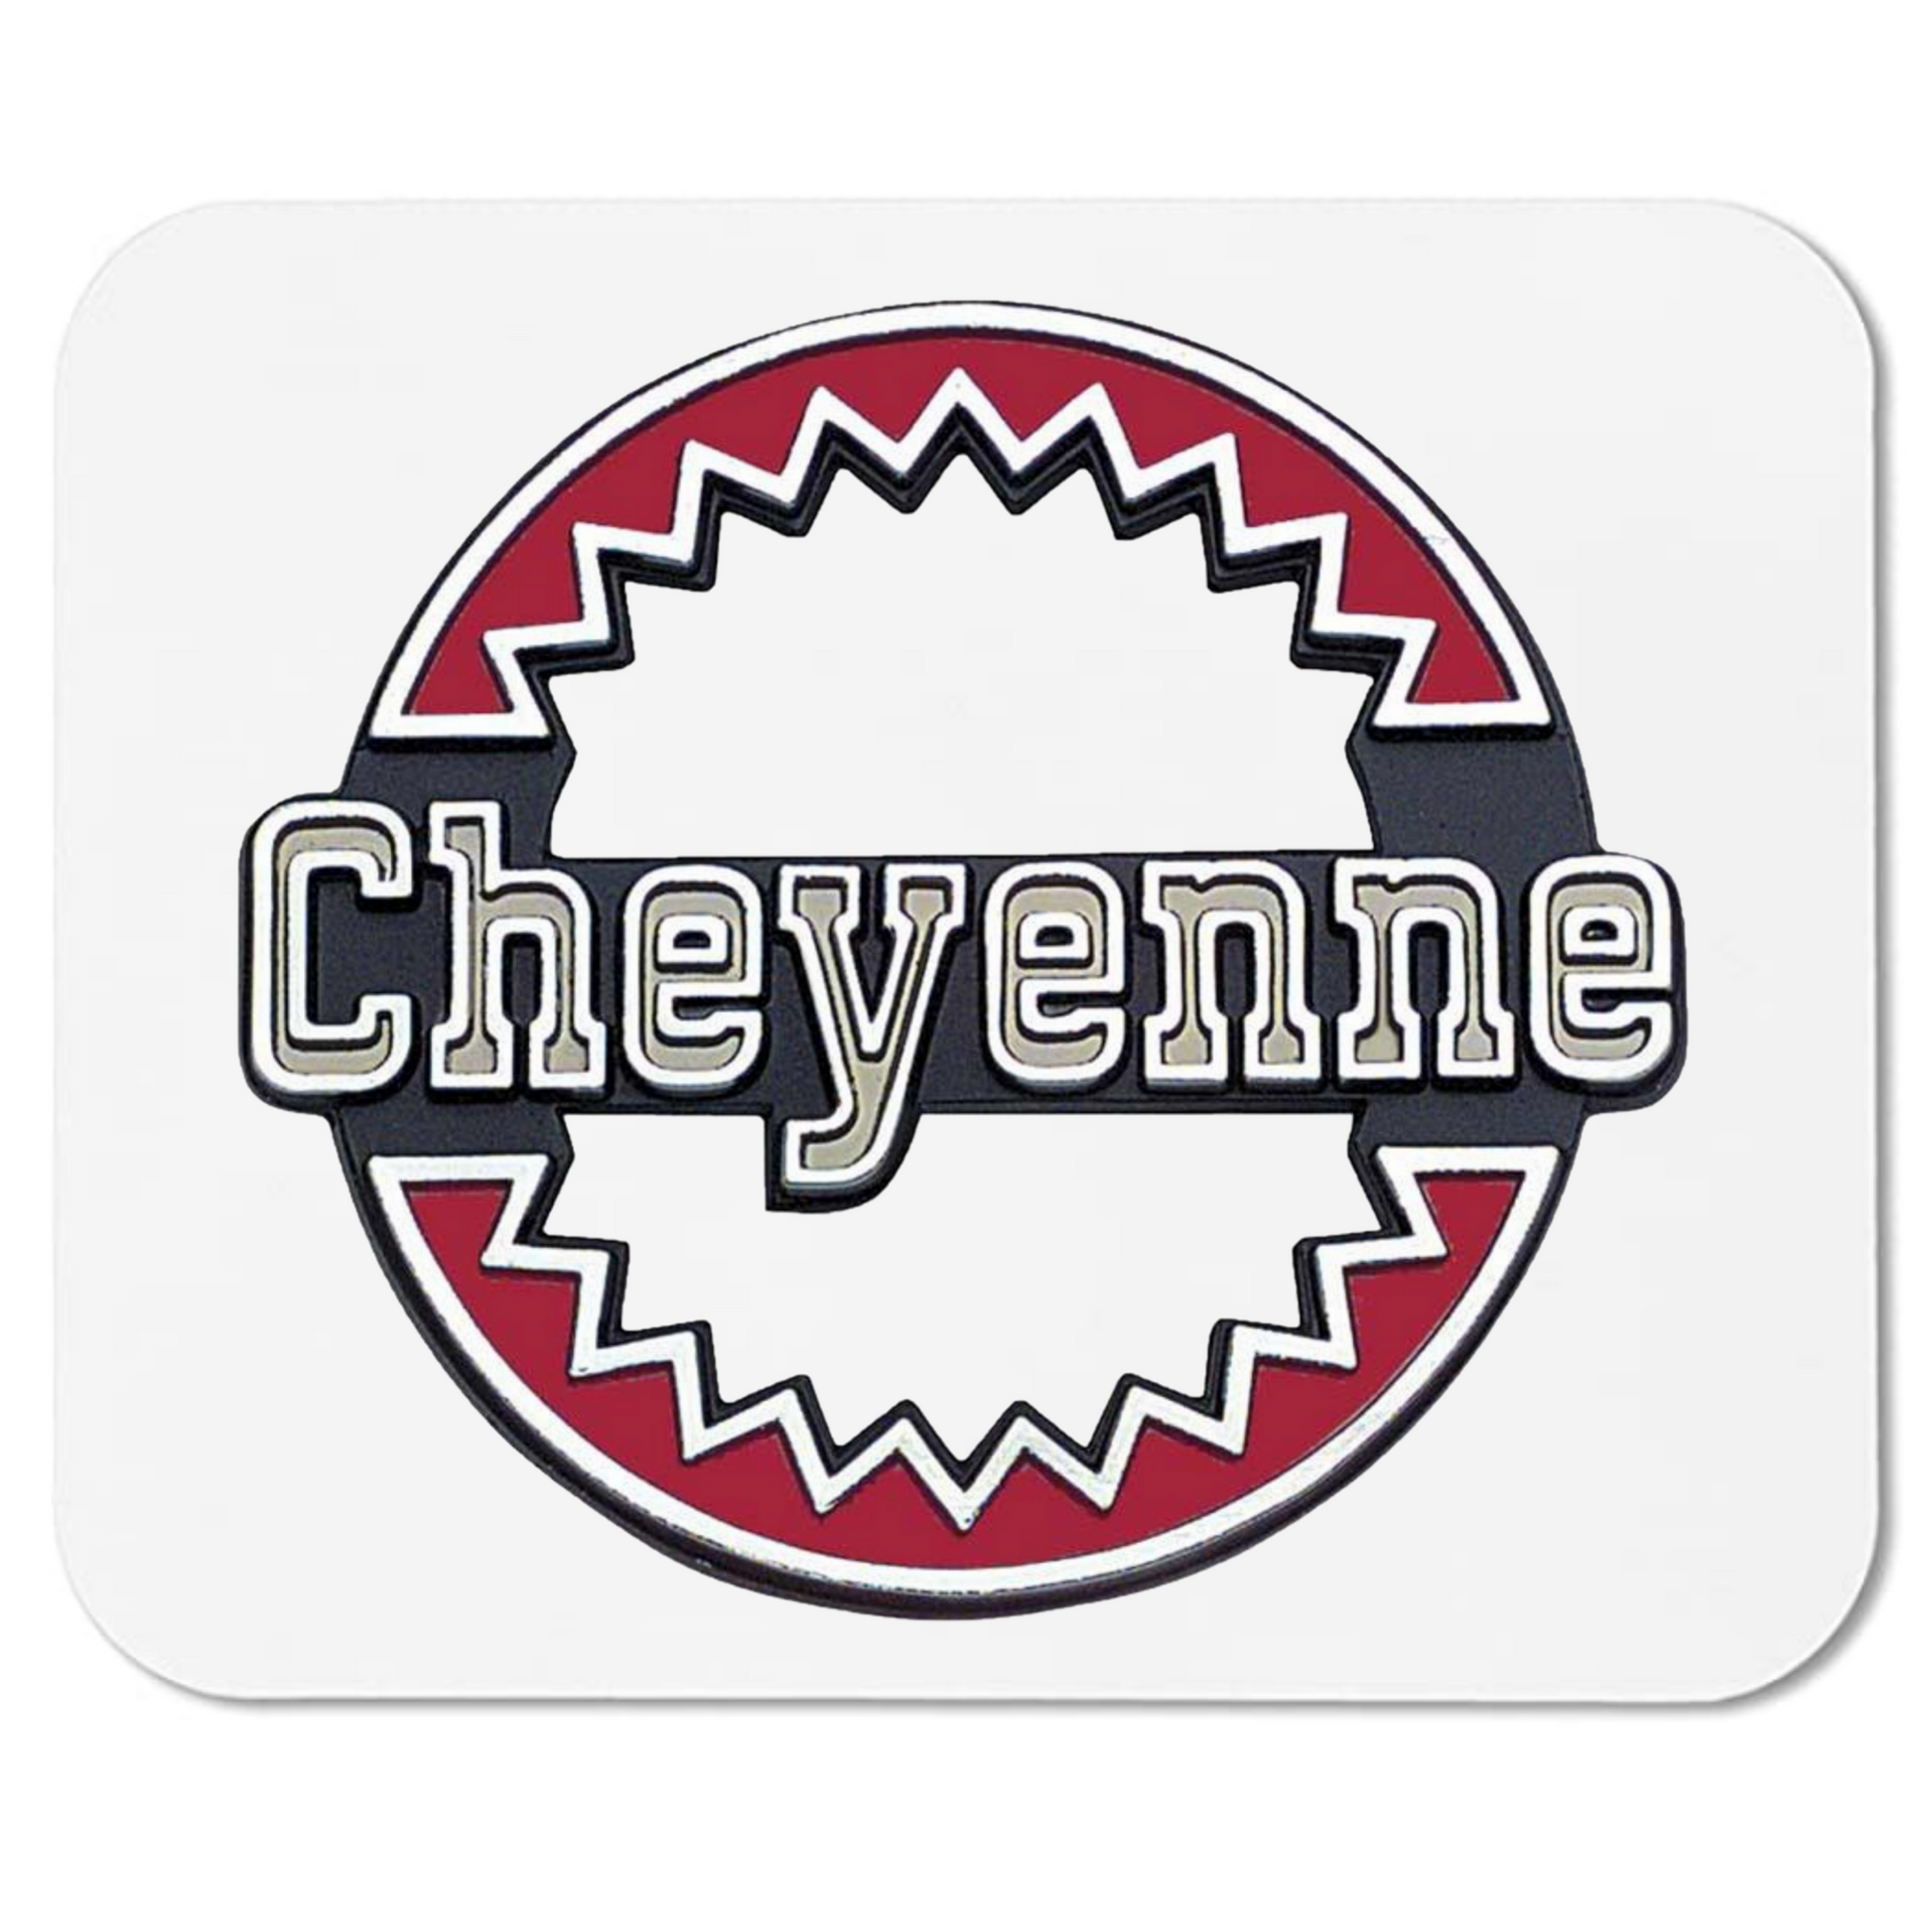 Chevy Cheyenne - Mouse Pad - 2 Sizes! - Mister Snarky's